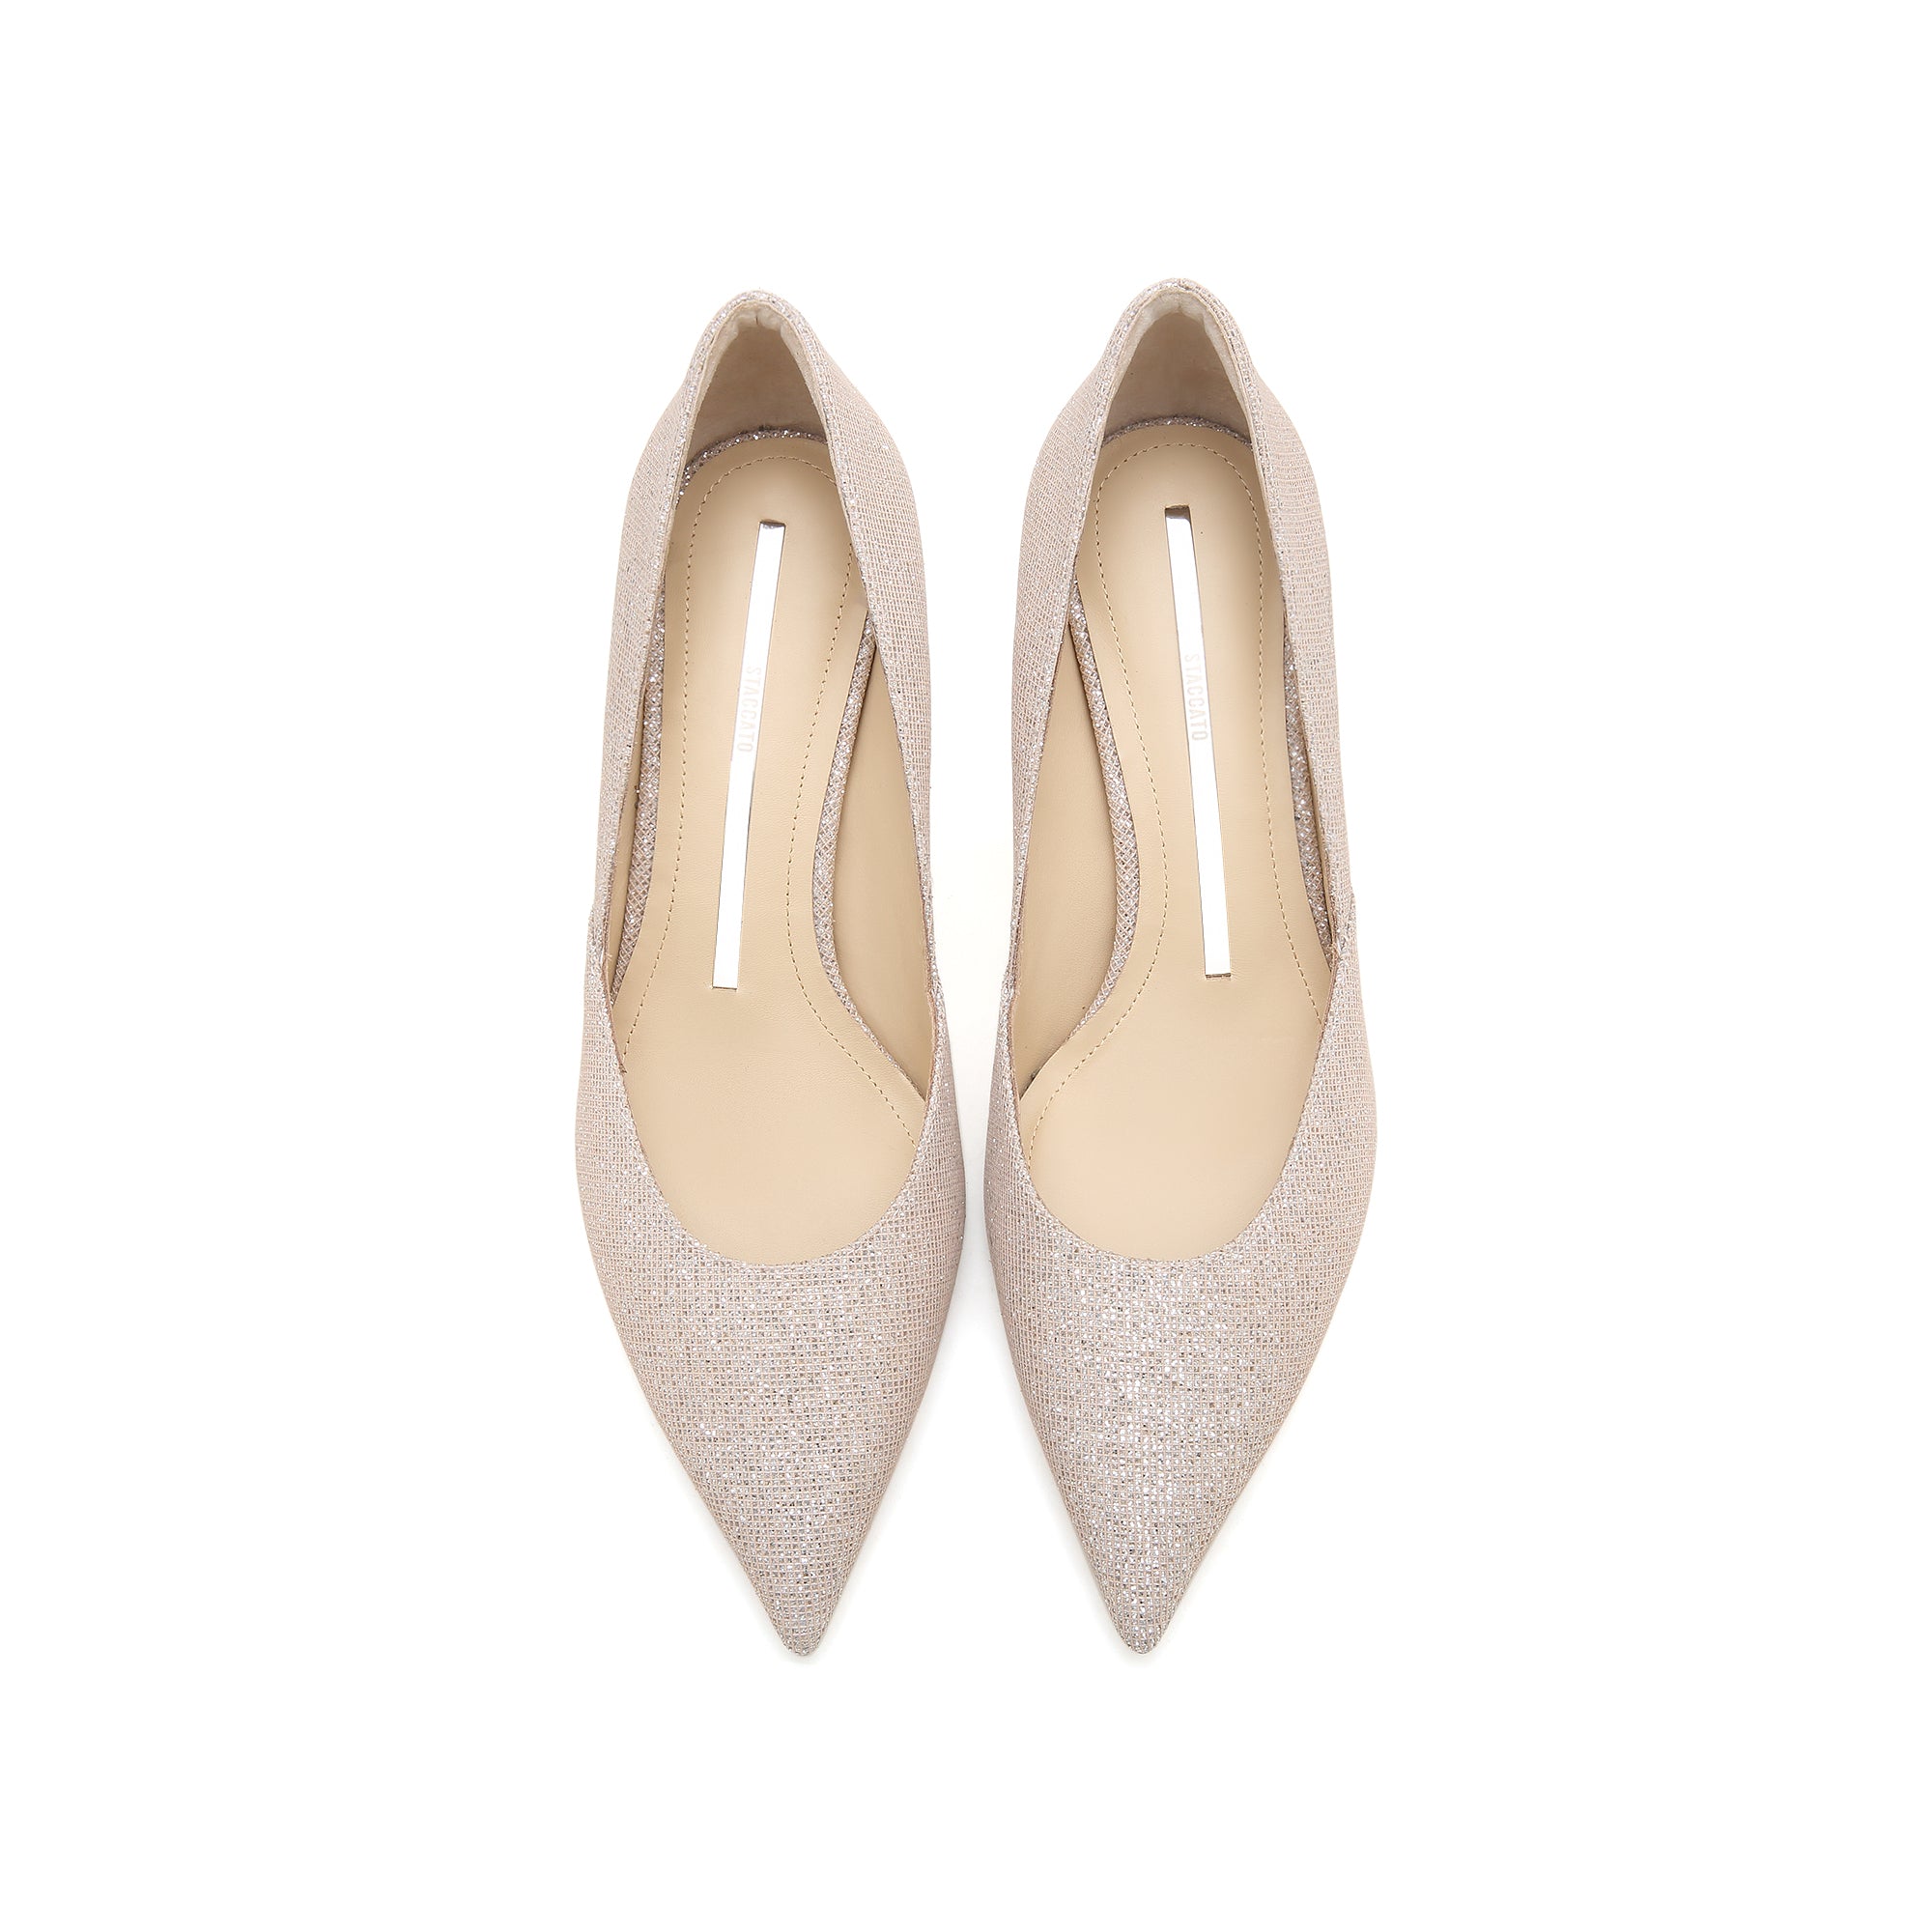 Pastel Glitter Pointed Crystal Heeled Pumps